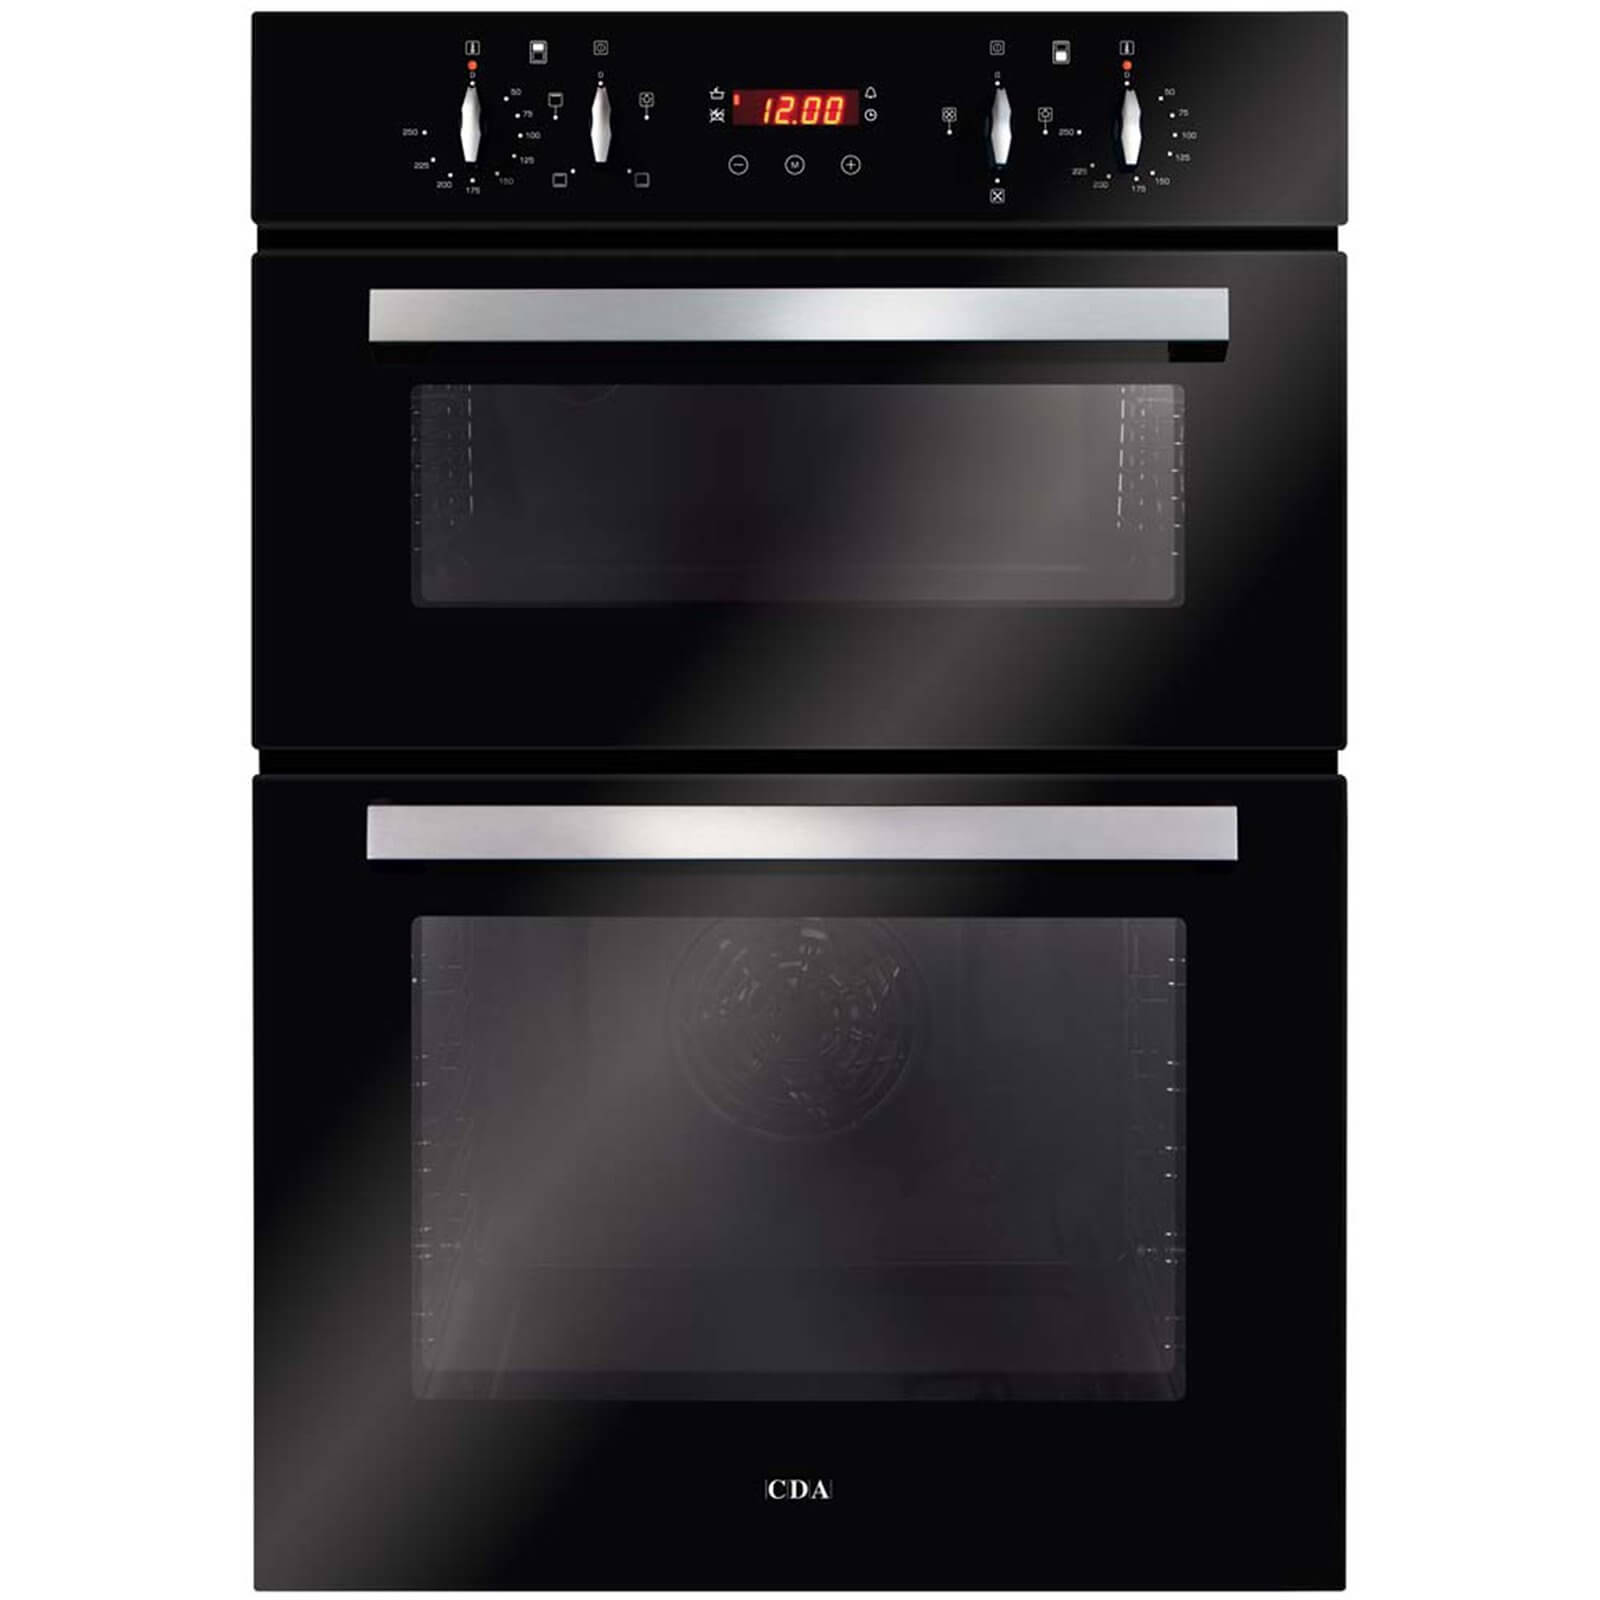 CDA DC940BL Built-in Multifunction Double Electric Oven - Black